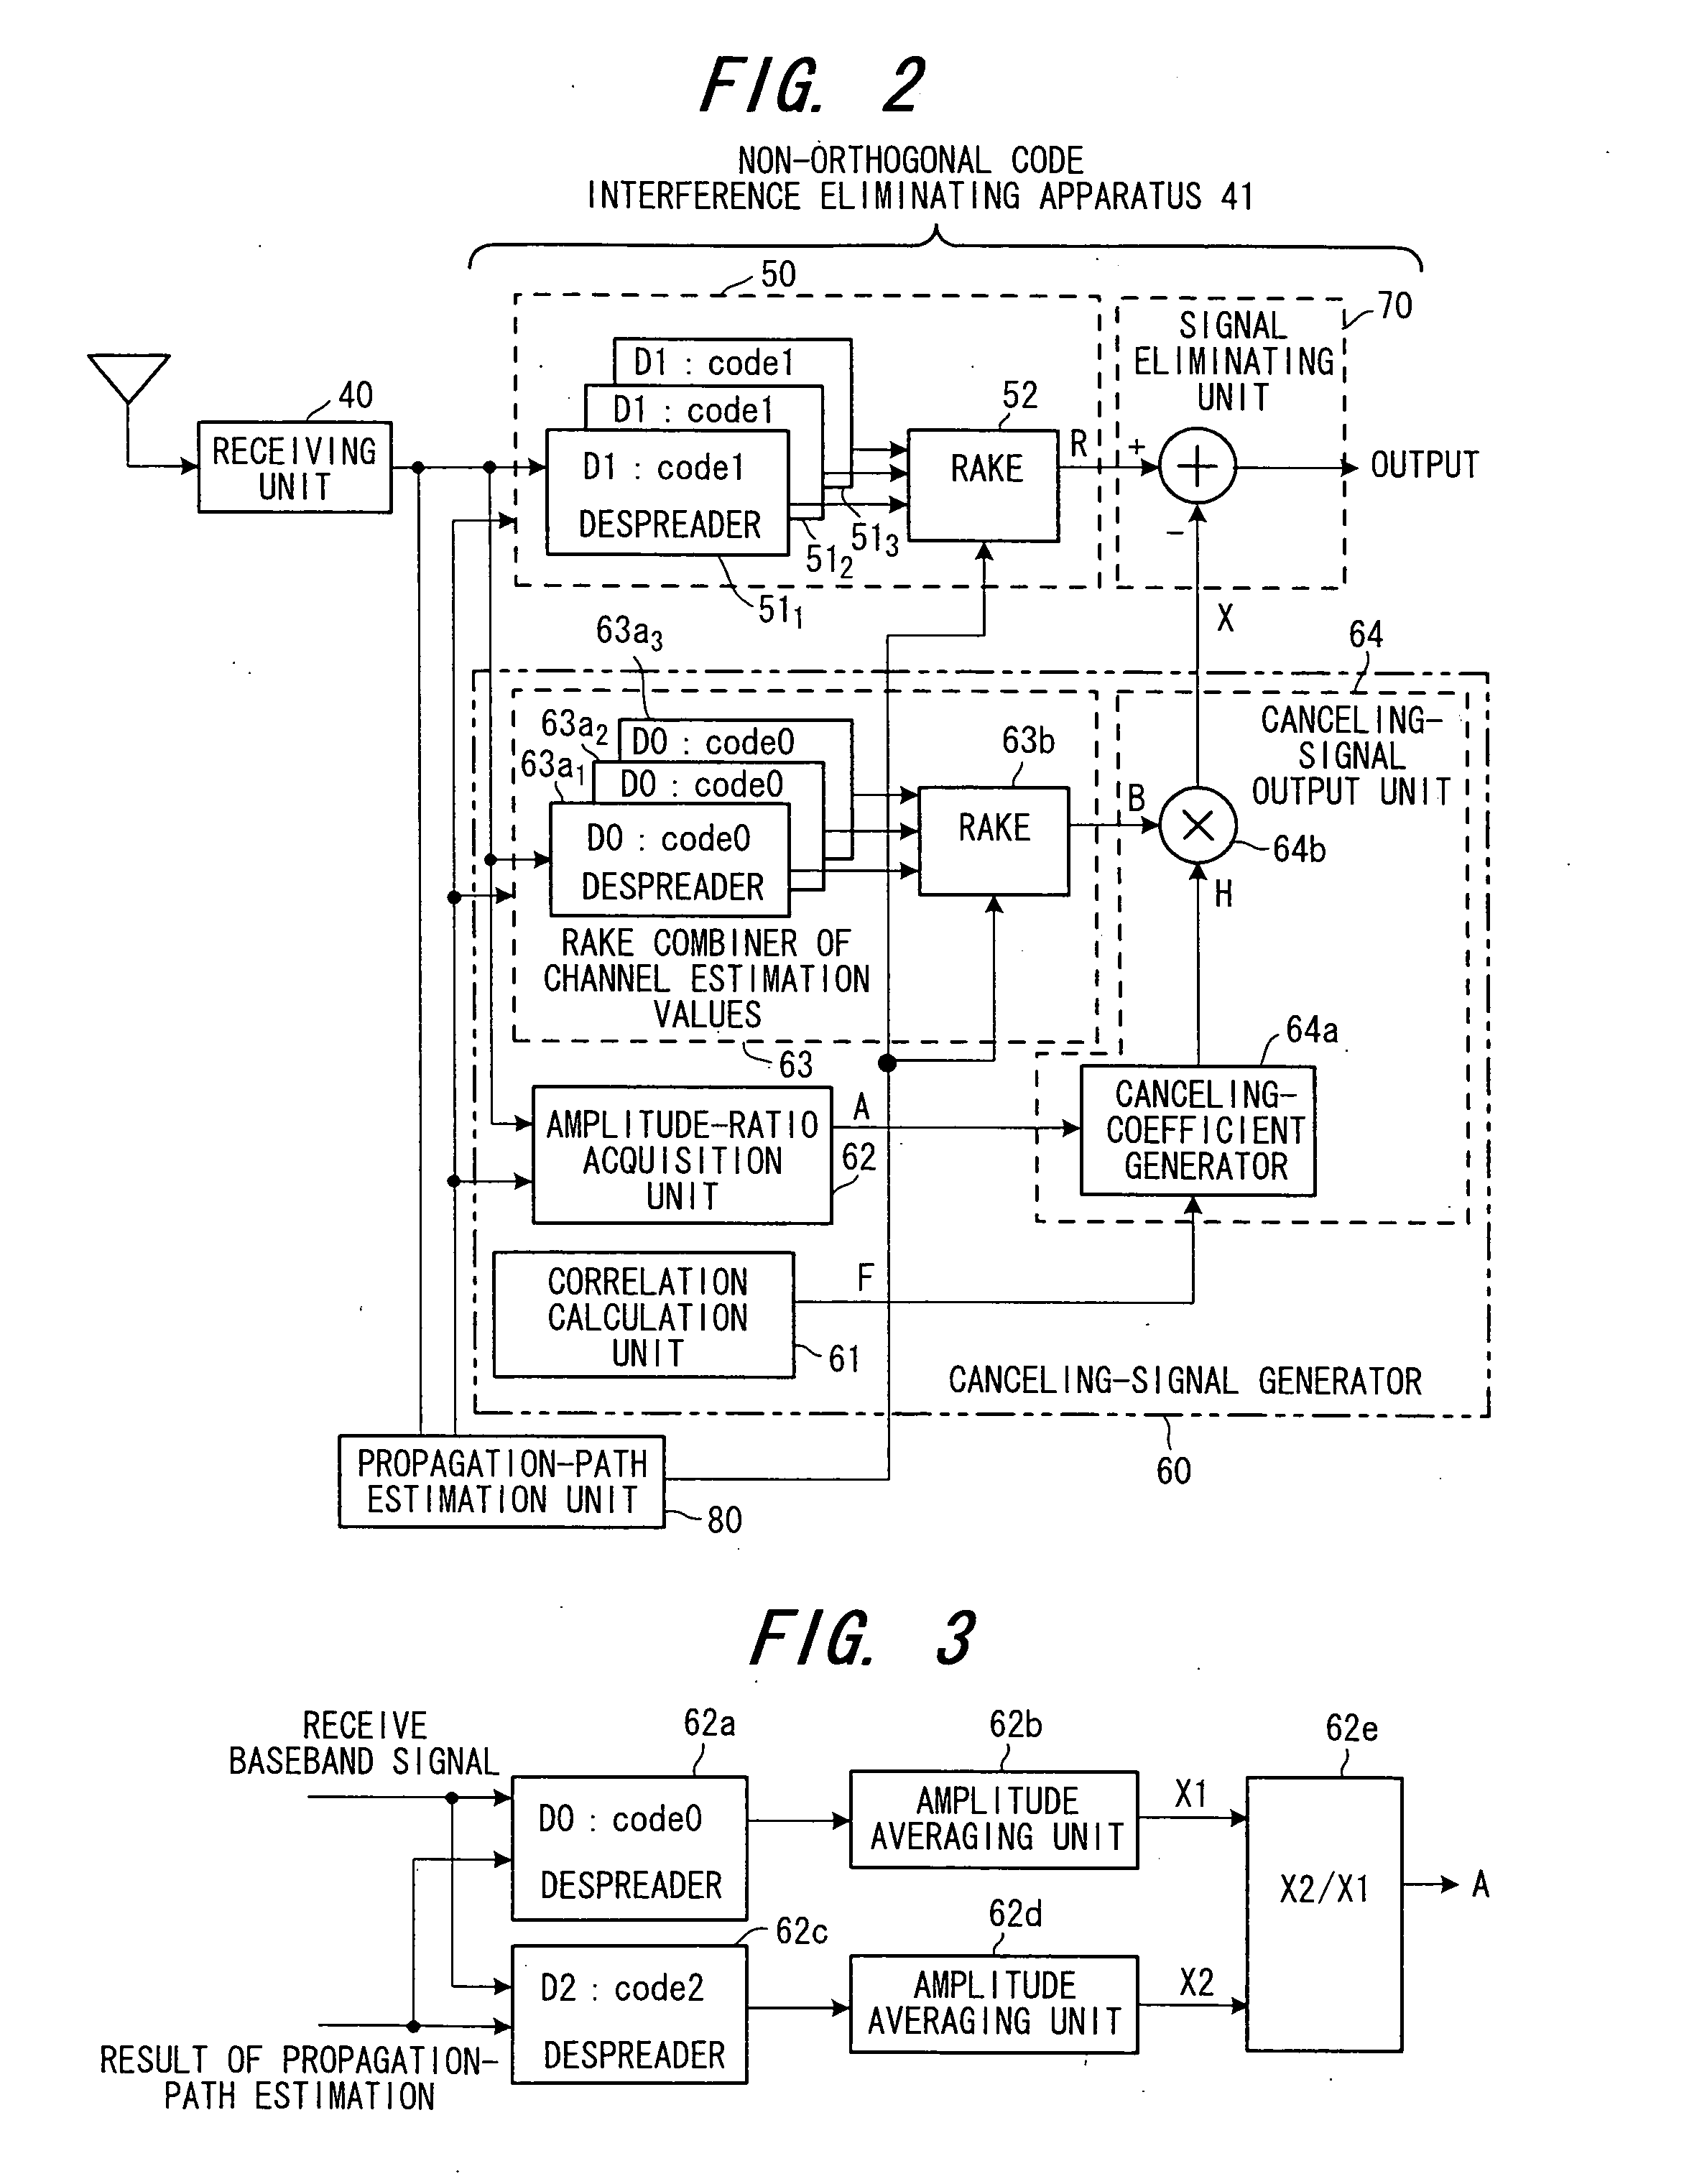 Interference eliminating apparatus and method